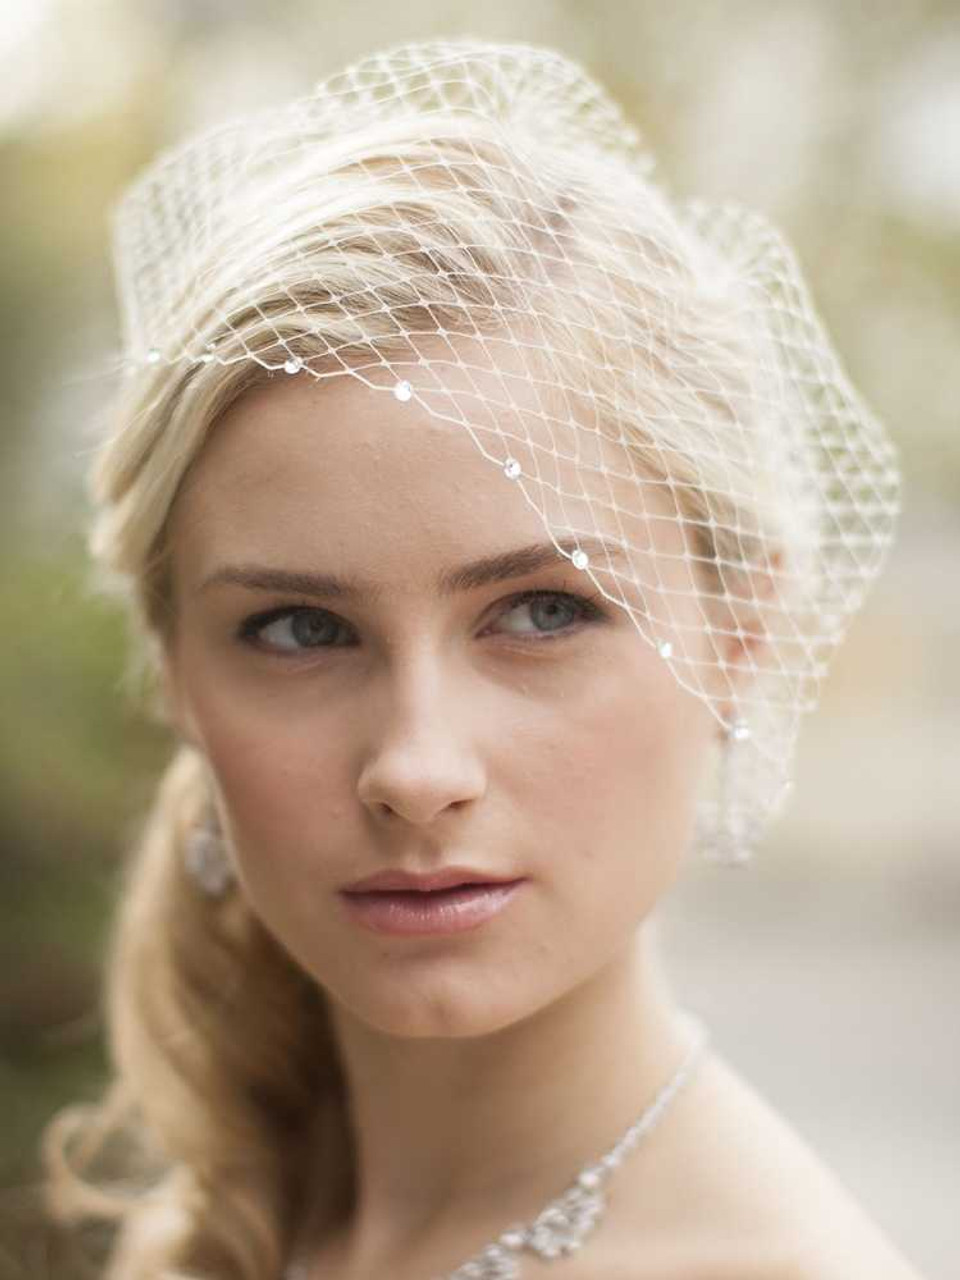 Birdcage veil with crystals on headband. French veil netting